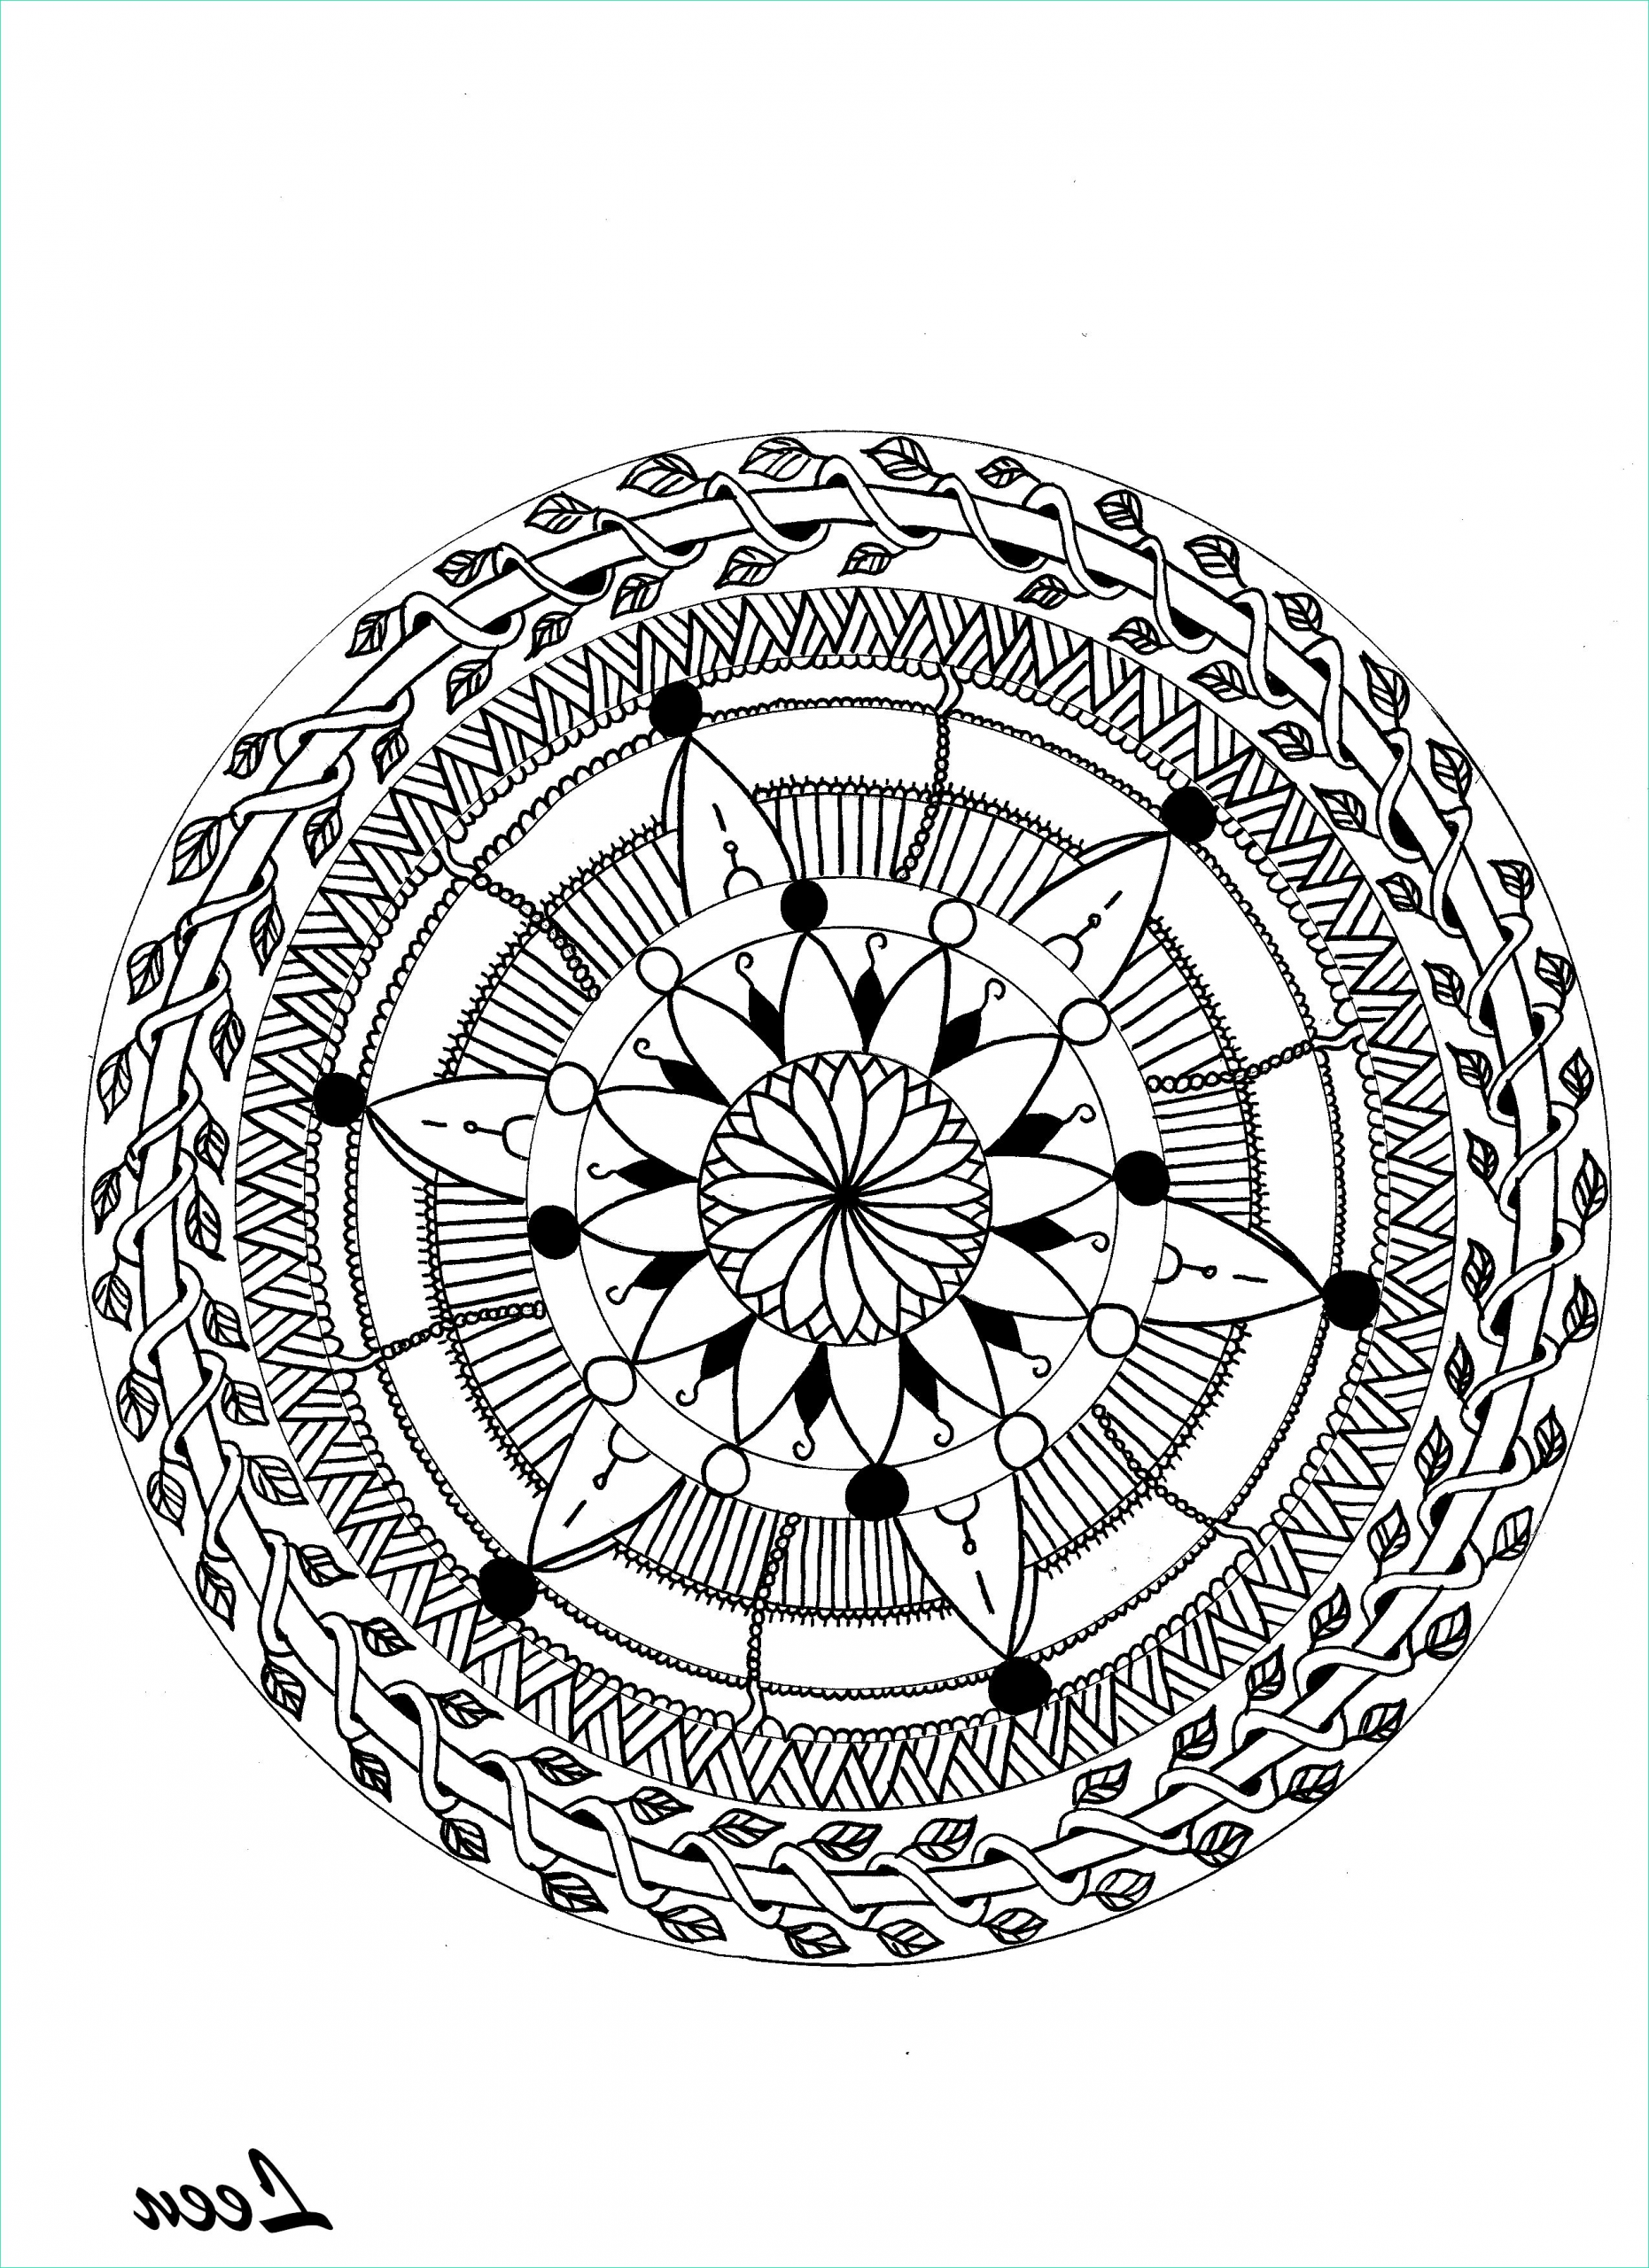 image=flowers ve ation mandala with leaves by Leen Margot 3